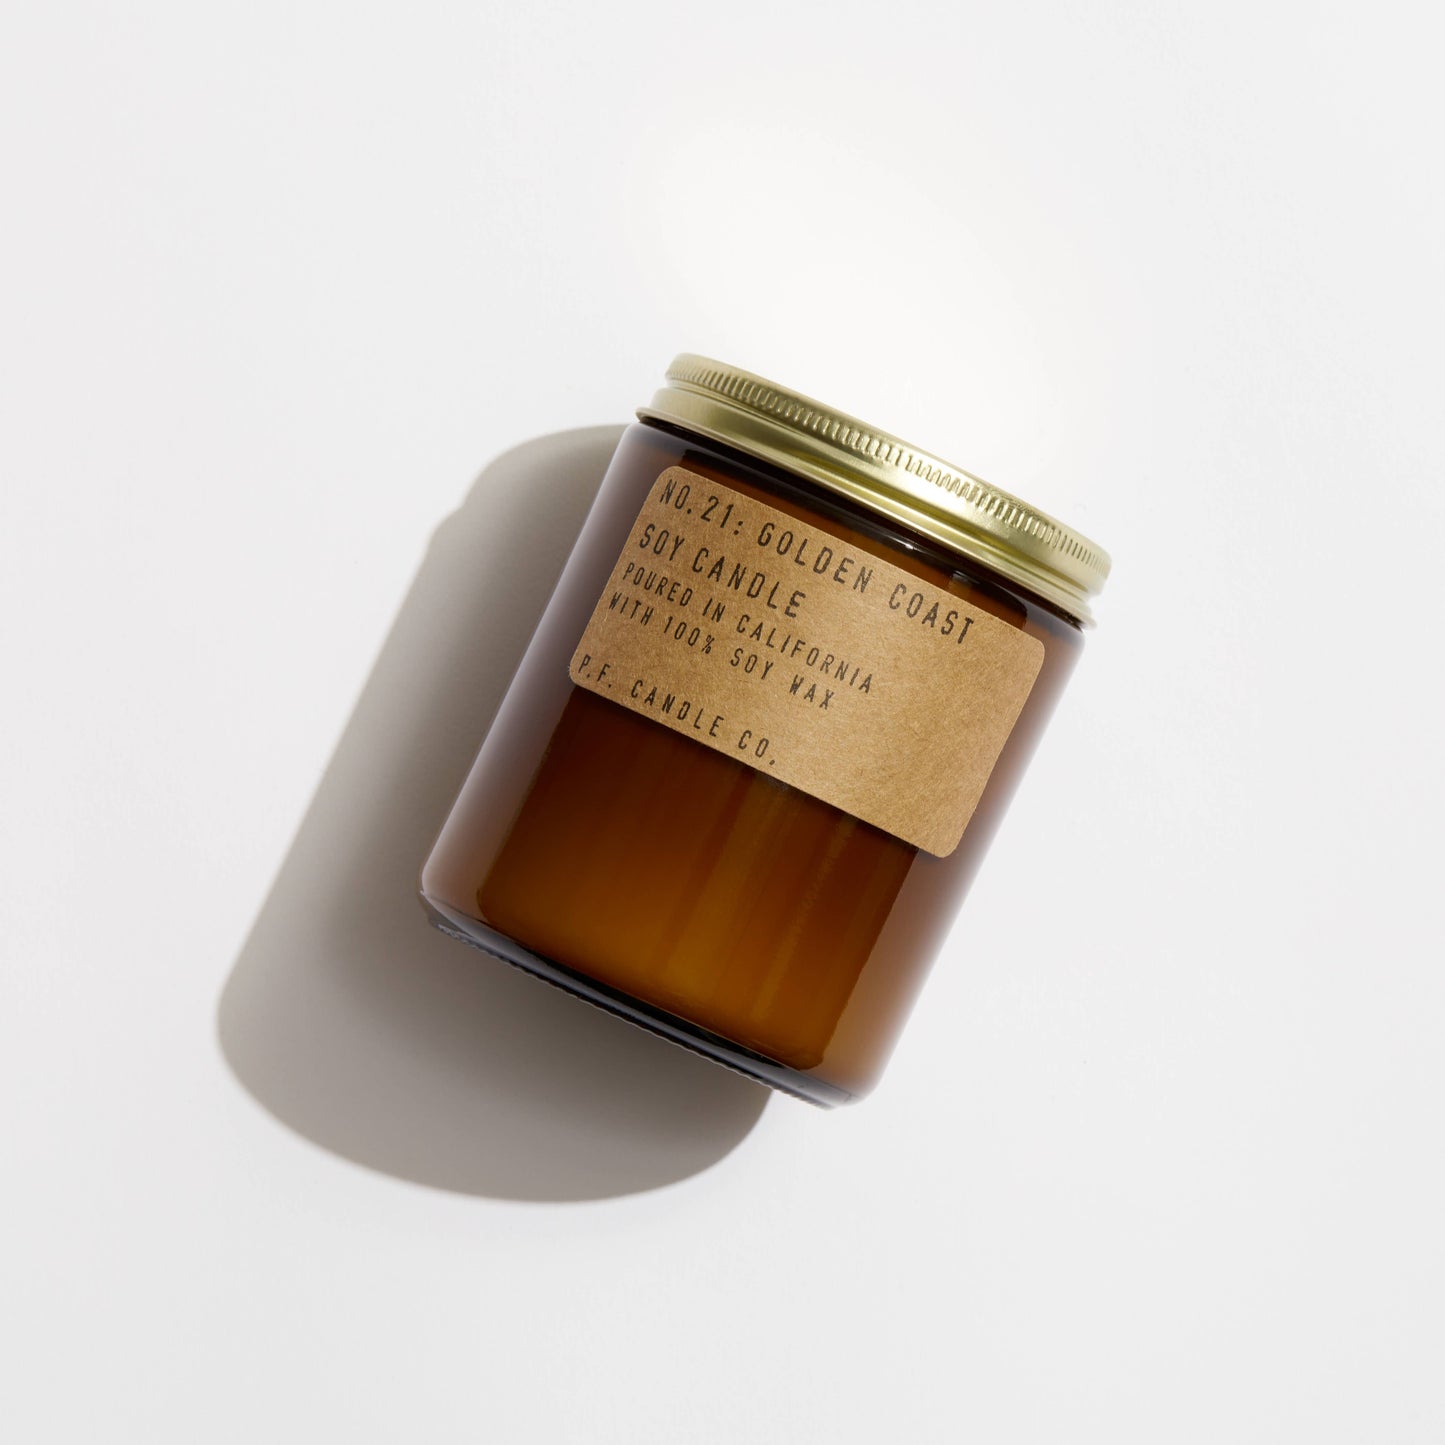 P.F. Candle Co. Golden Coast - 7.2 oz Standard Soy Candle